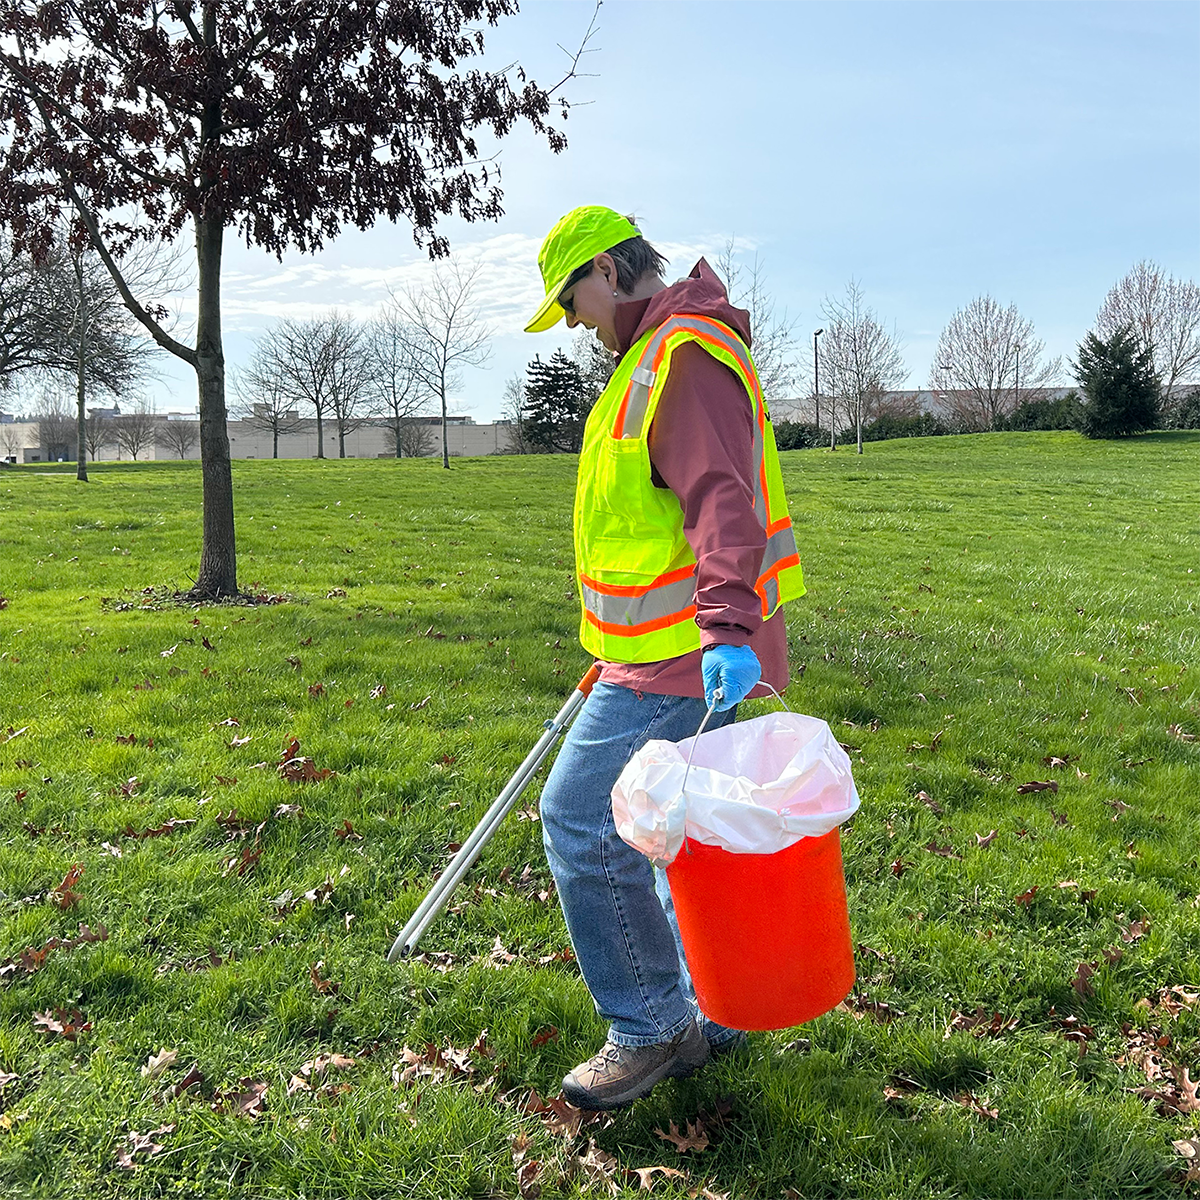 Volunteer picking up litter at local park with field and tree in background